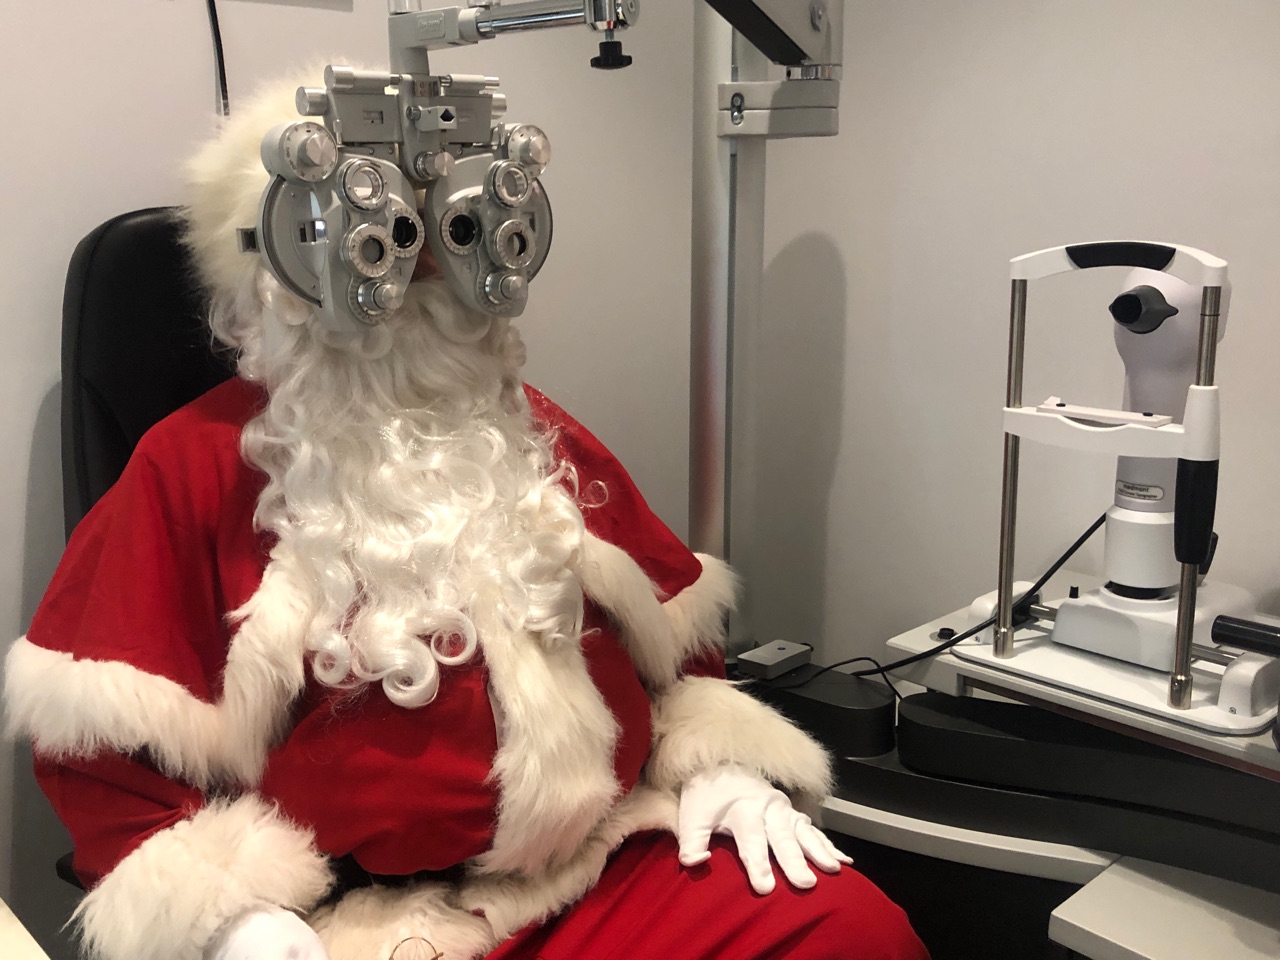 Santa looking through a phoropter (ahhh, so that’s what it’s called!)